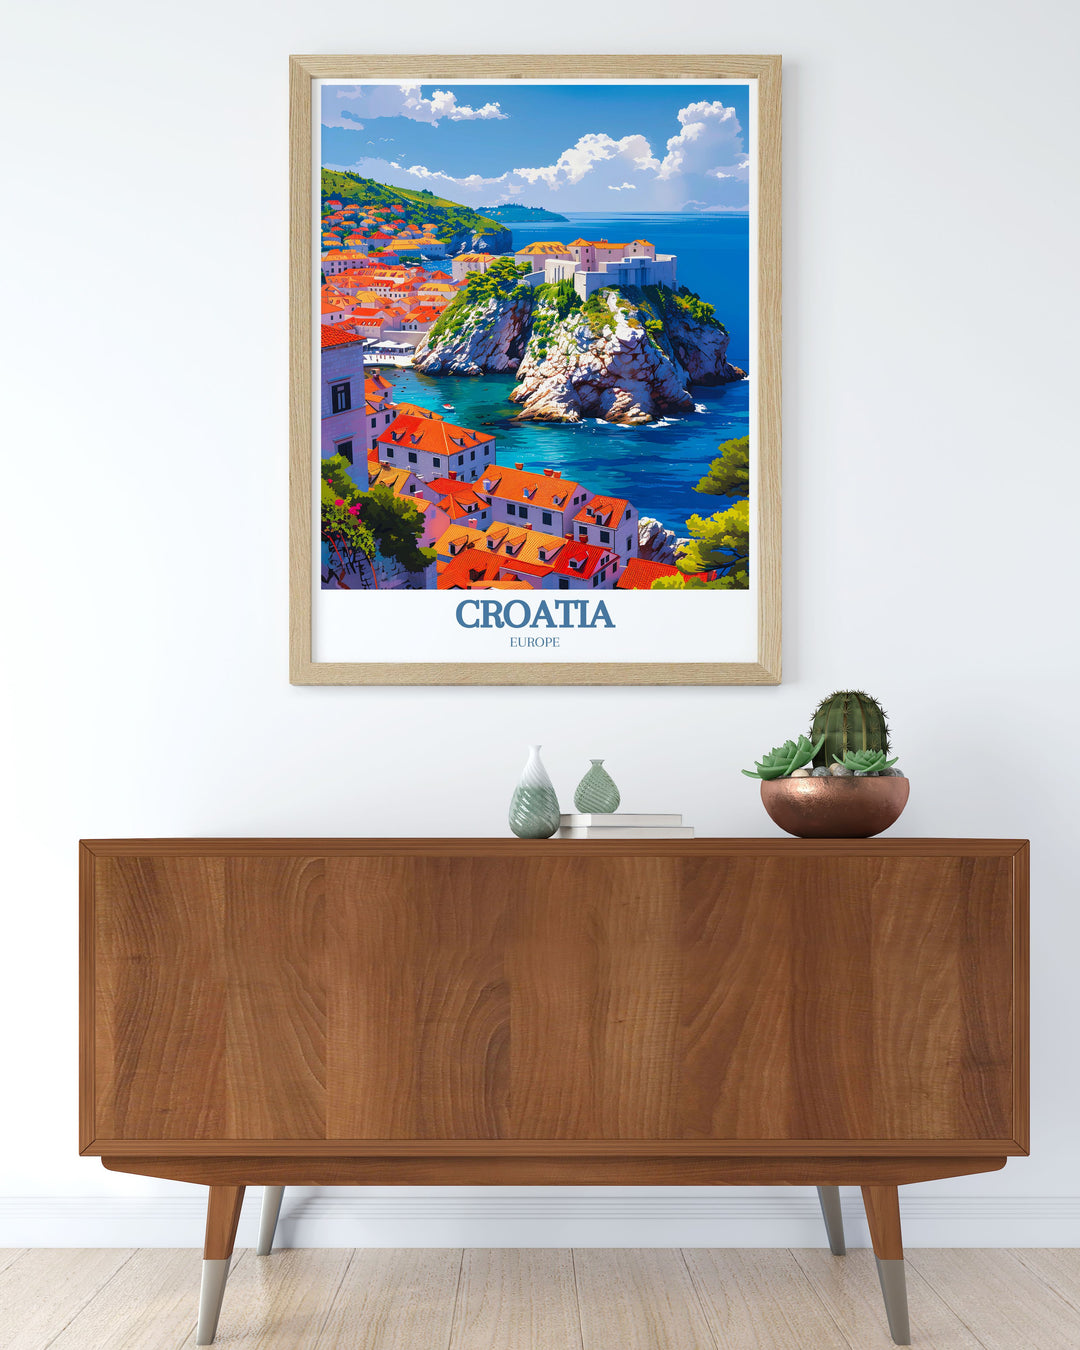 Highlighting the scenic vistas of Dubrovnik Old Town and the vibrant life of the Adriatic Sea, this travel poster is perfect for those who appreciate the scenic and cultural richness of Croatia.